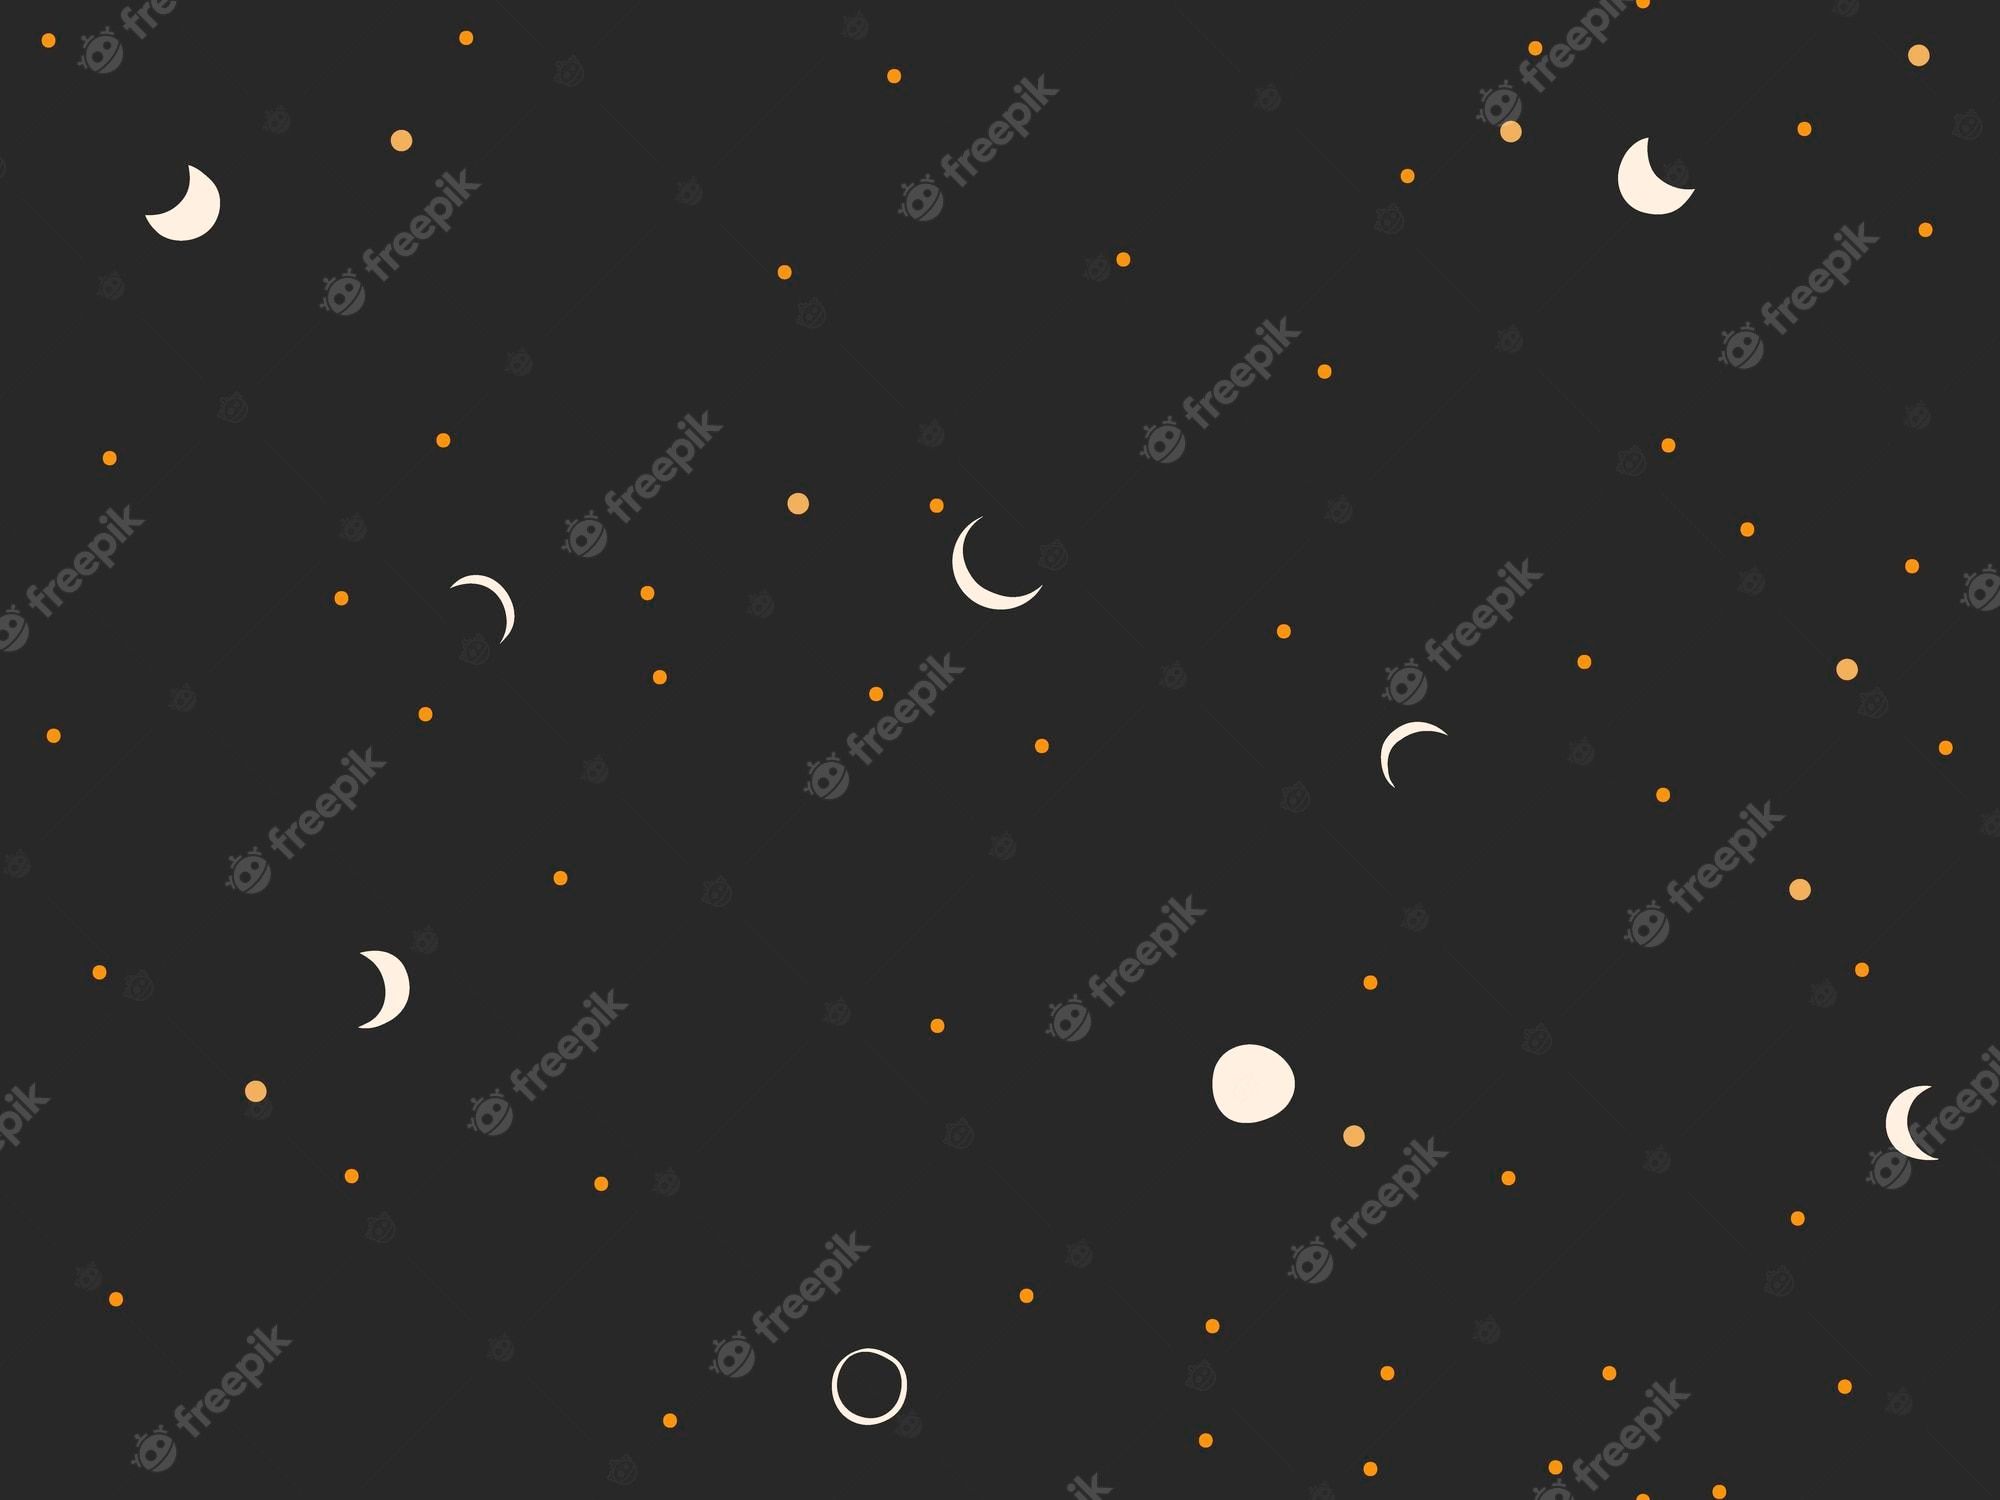 A black background with white and orange dots and phases of the moon - Moon phases